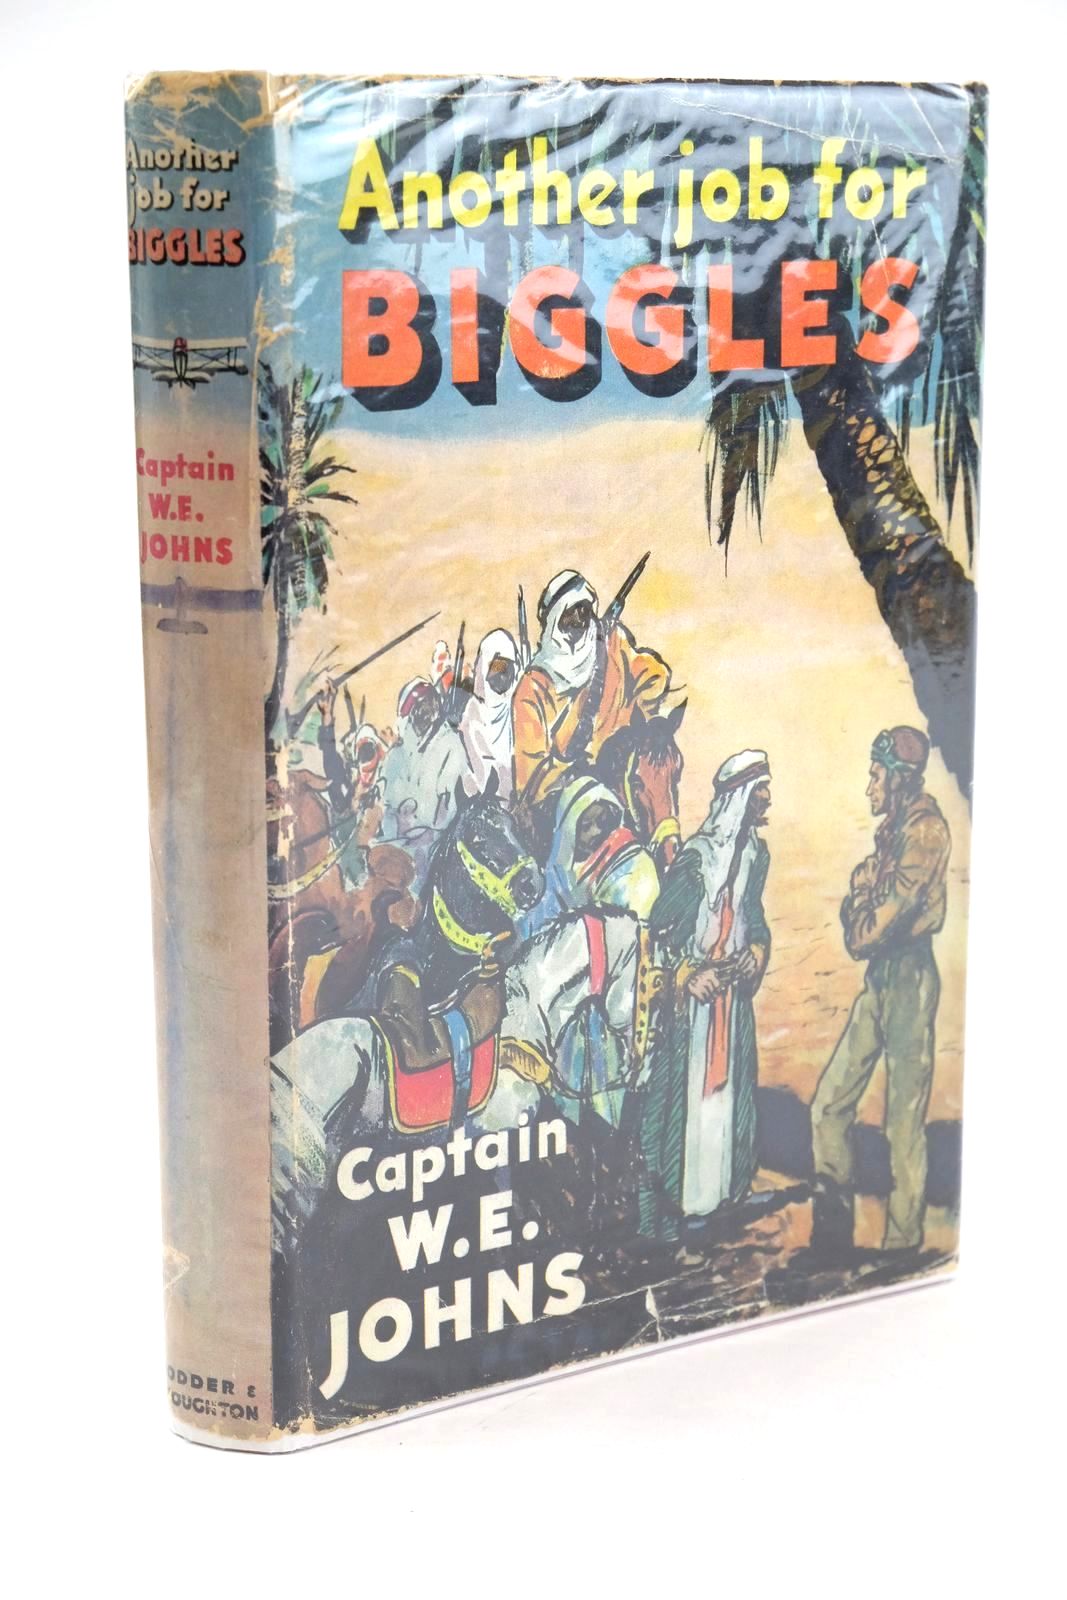 Photo of ANOTHER JOB FOR BIGGLES written by Johns, W.E. illustrated by Stead,  published by Hodder & Stoughton (STOCK CODE: 1324037)  for sale by Stella & Rose's Books